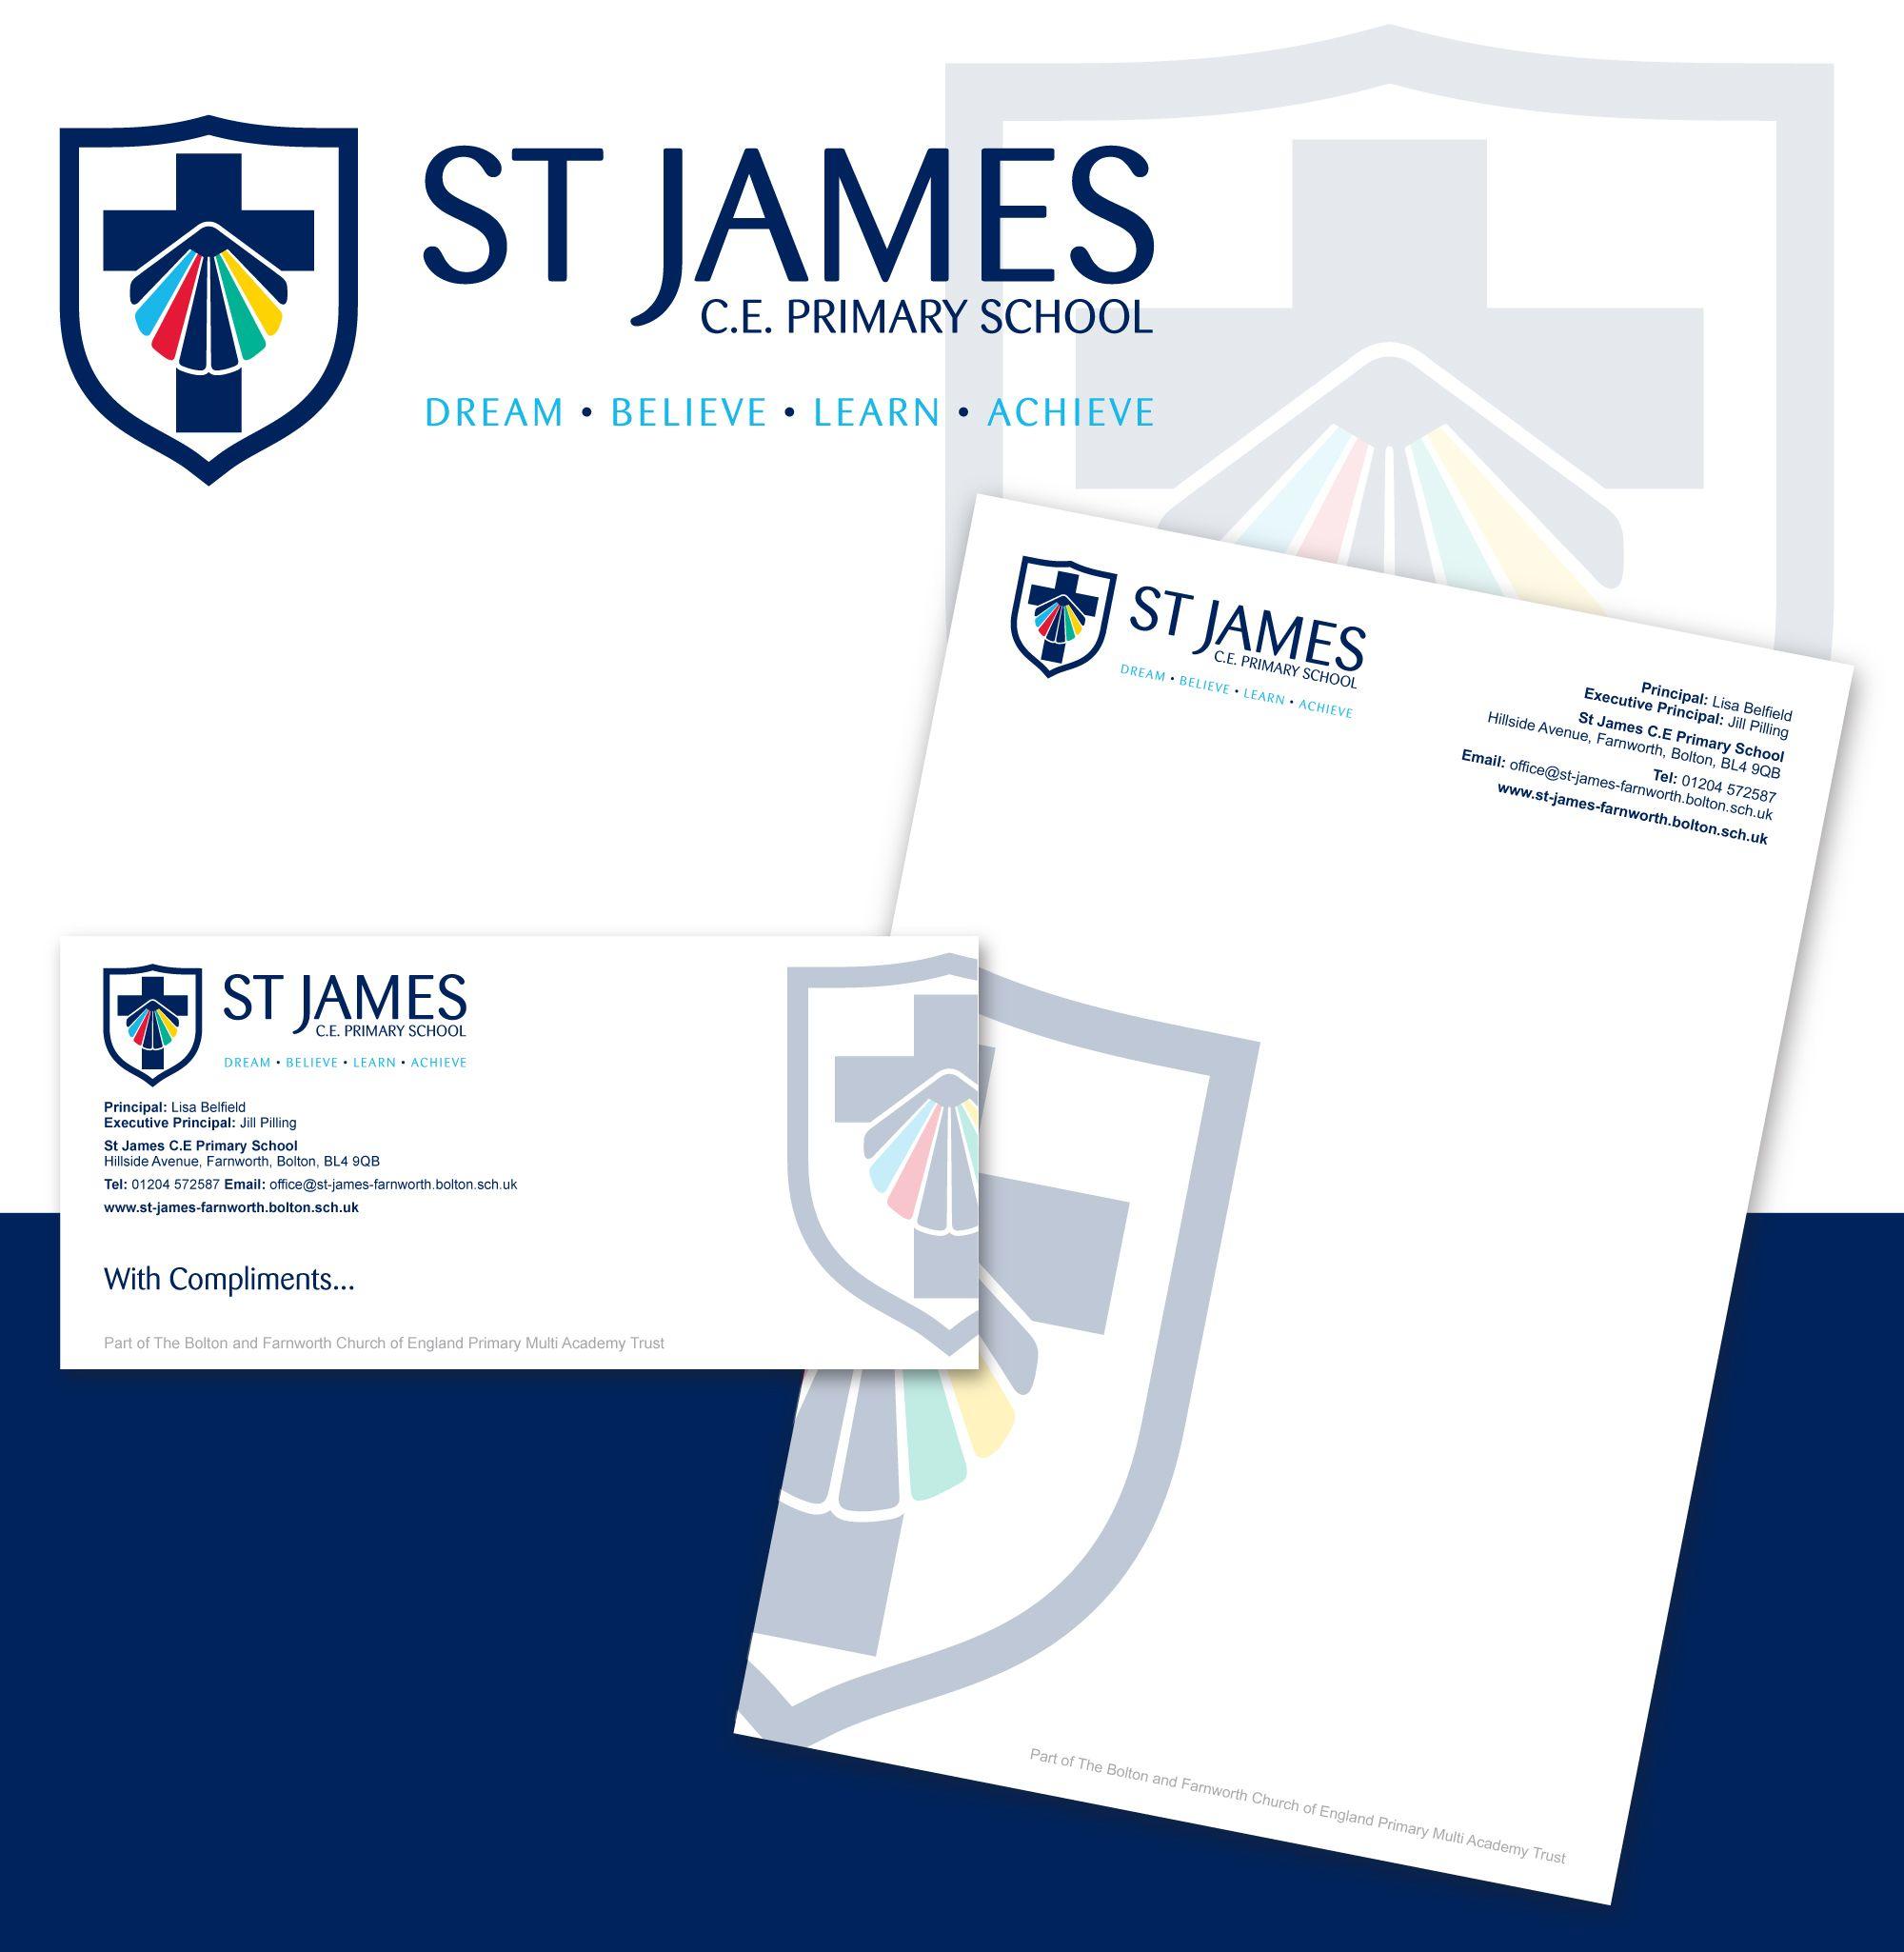 School Email Logo - Our Work - Primary School logo Design - St James | Hive Education ...